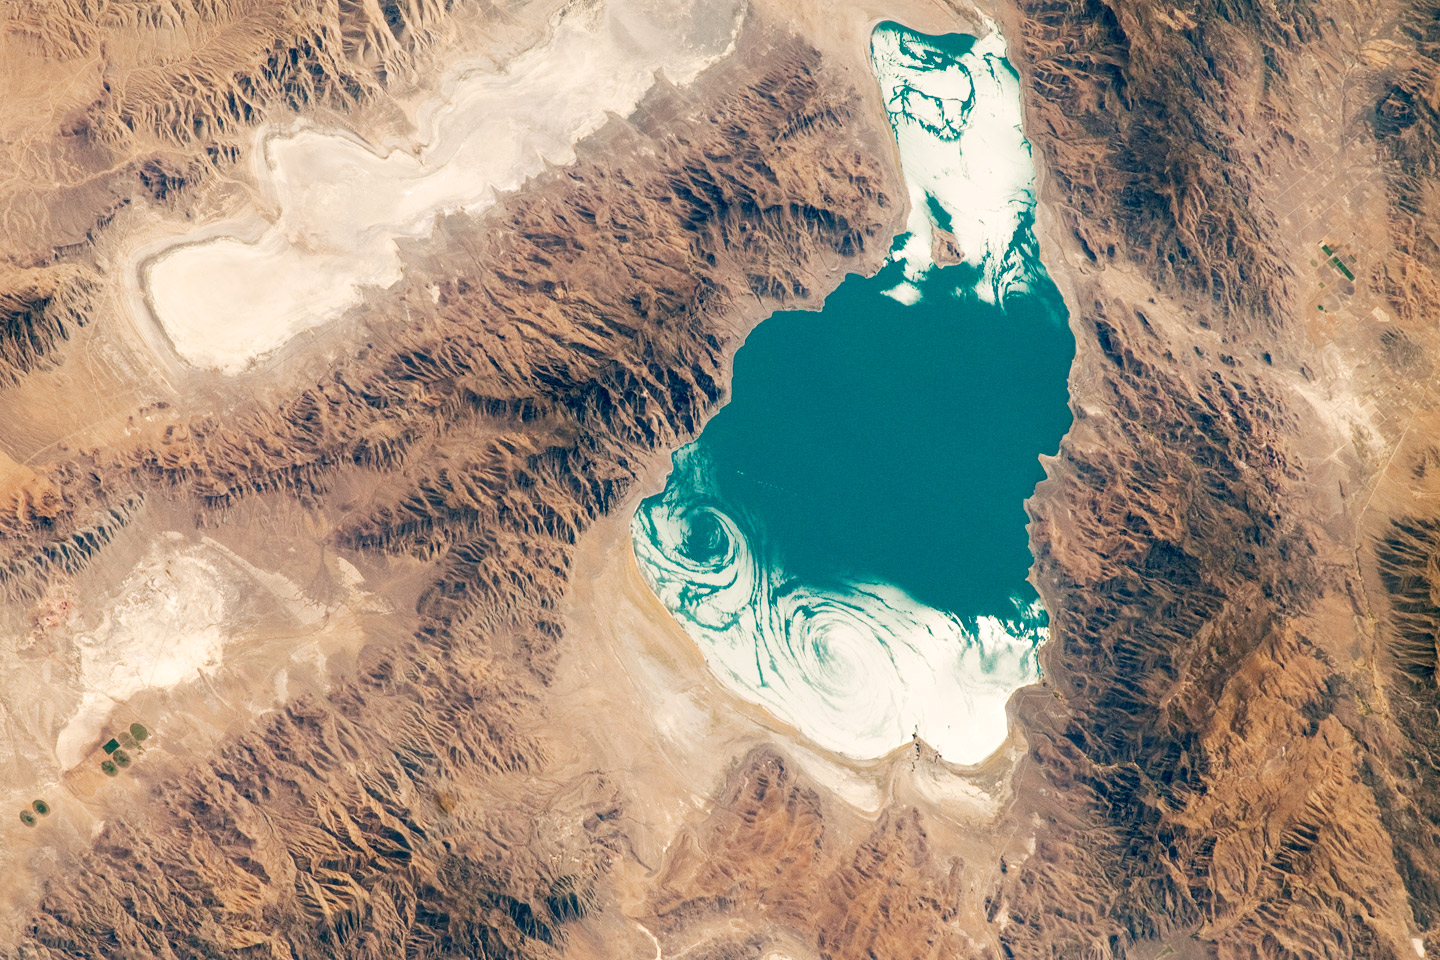 Pyramid Lake, Nevada - related image preview